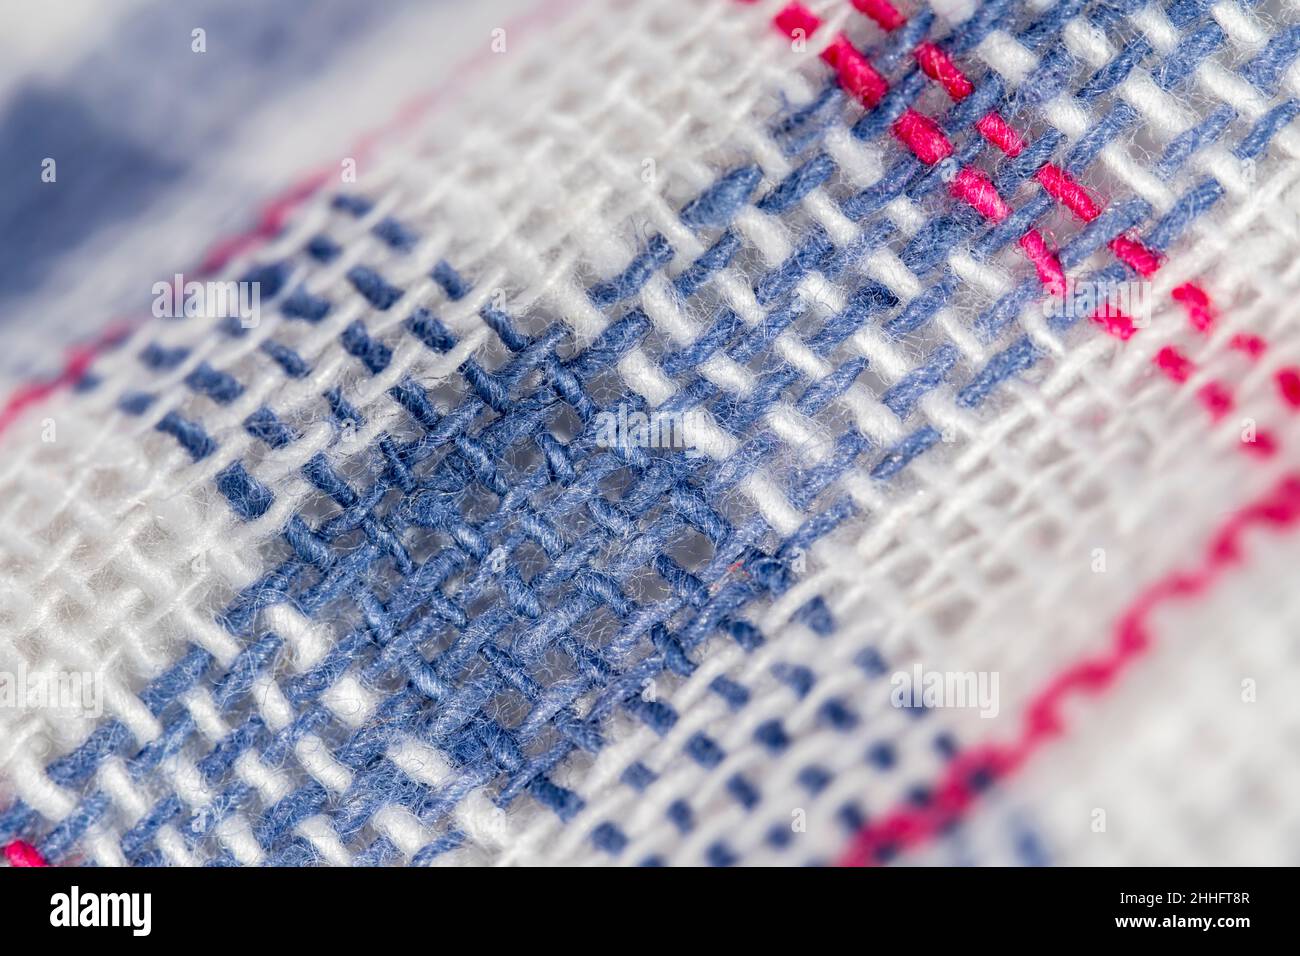 Macro close-up of 100% cotton tea towel fabric, showing cloth warp and weft thread pattern and coloured stitching. Stitched line, rows of stitches. Stock Photo